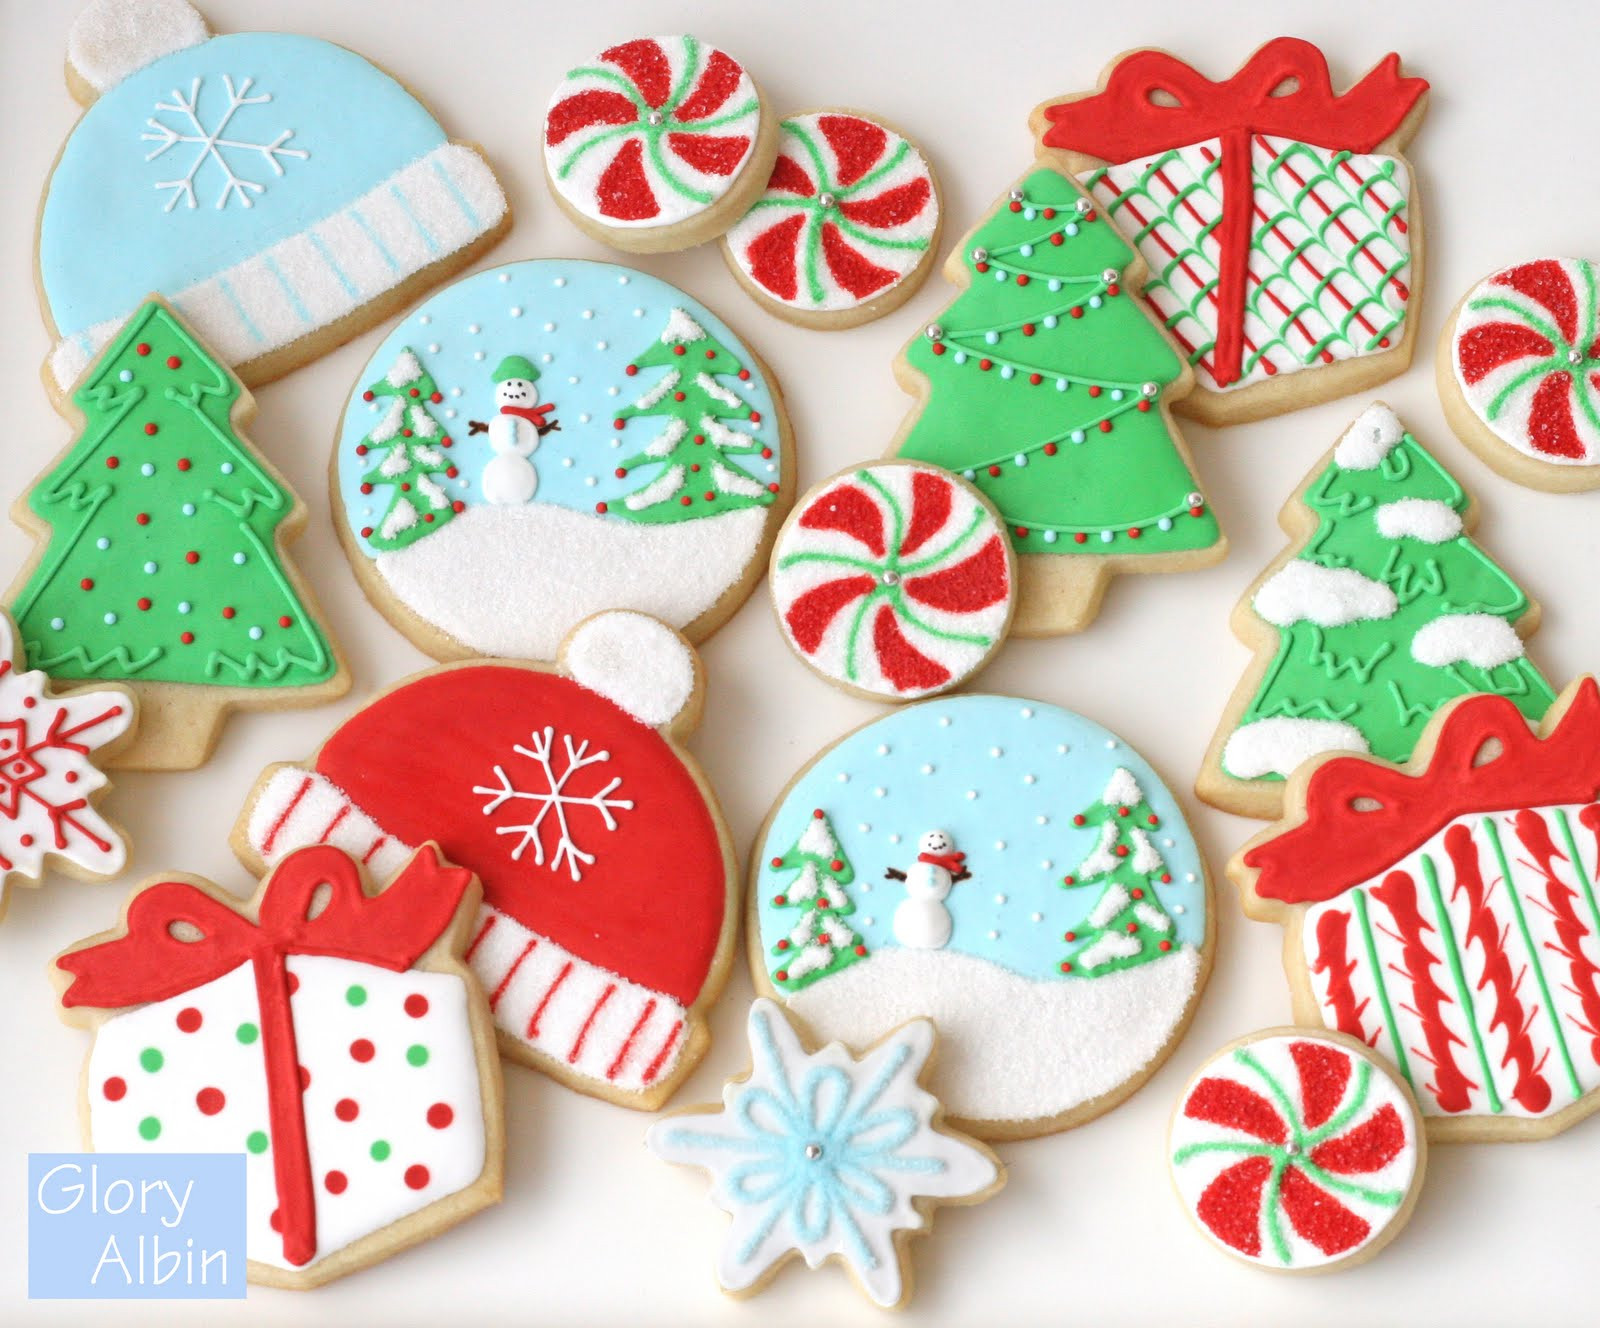 15 Amazing Decorating Sugar Cookies with Royal Icing